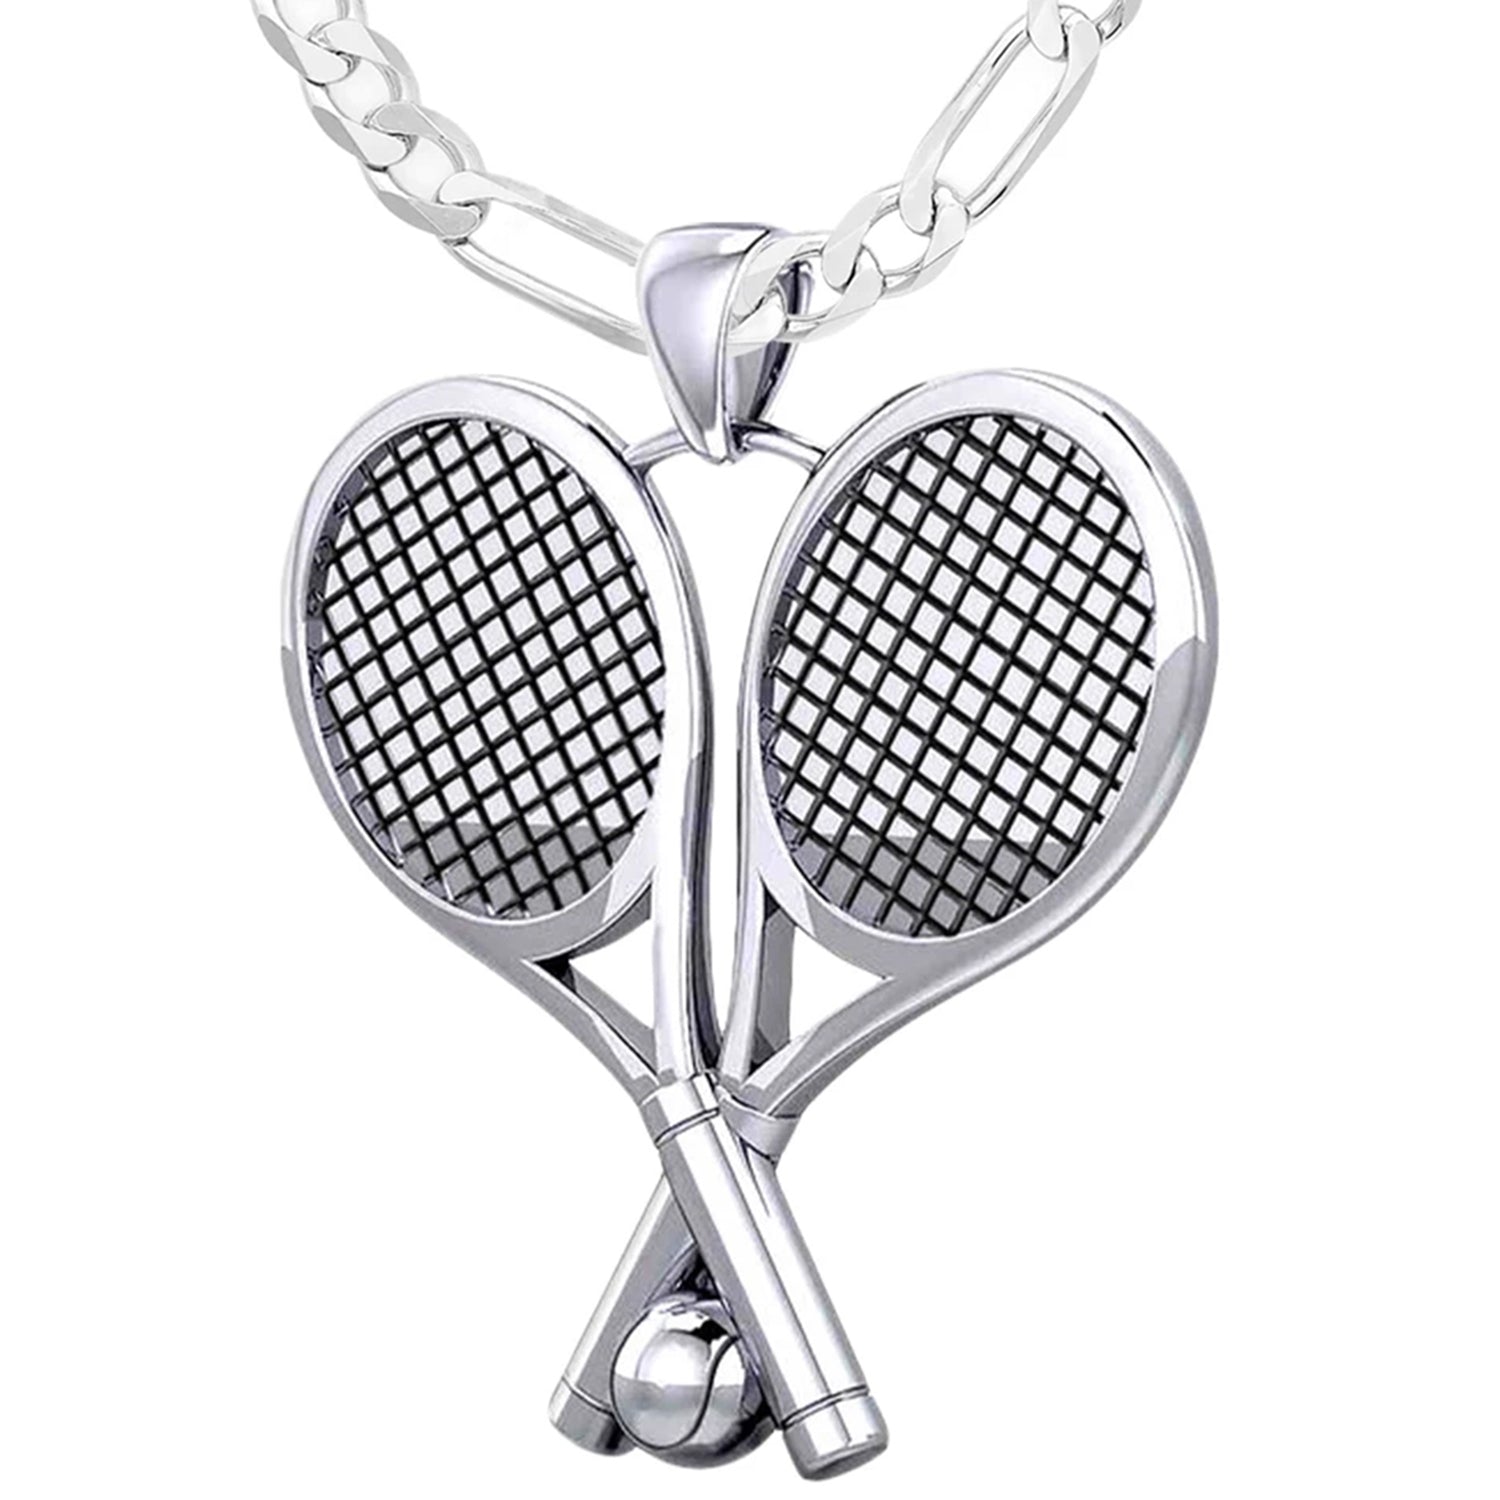 Small 925 Sterling Silver 3D Double Tennis Racket & Ball Pendant Necklace, 25mm - US Jewels